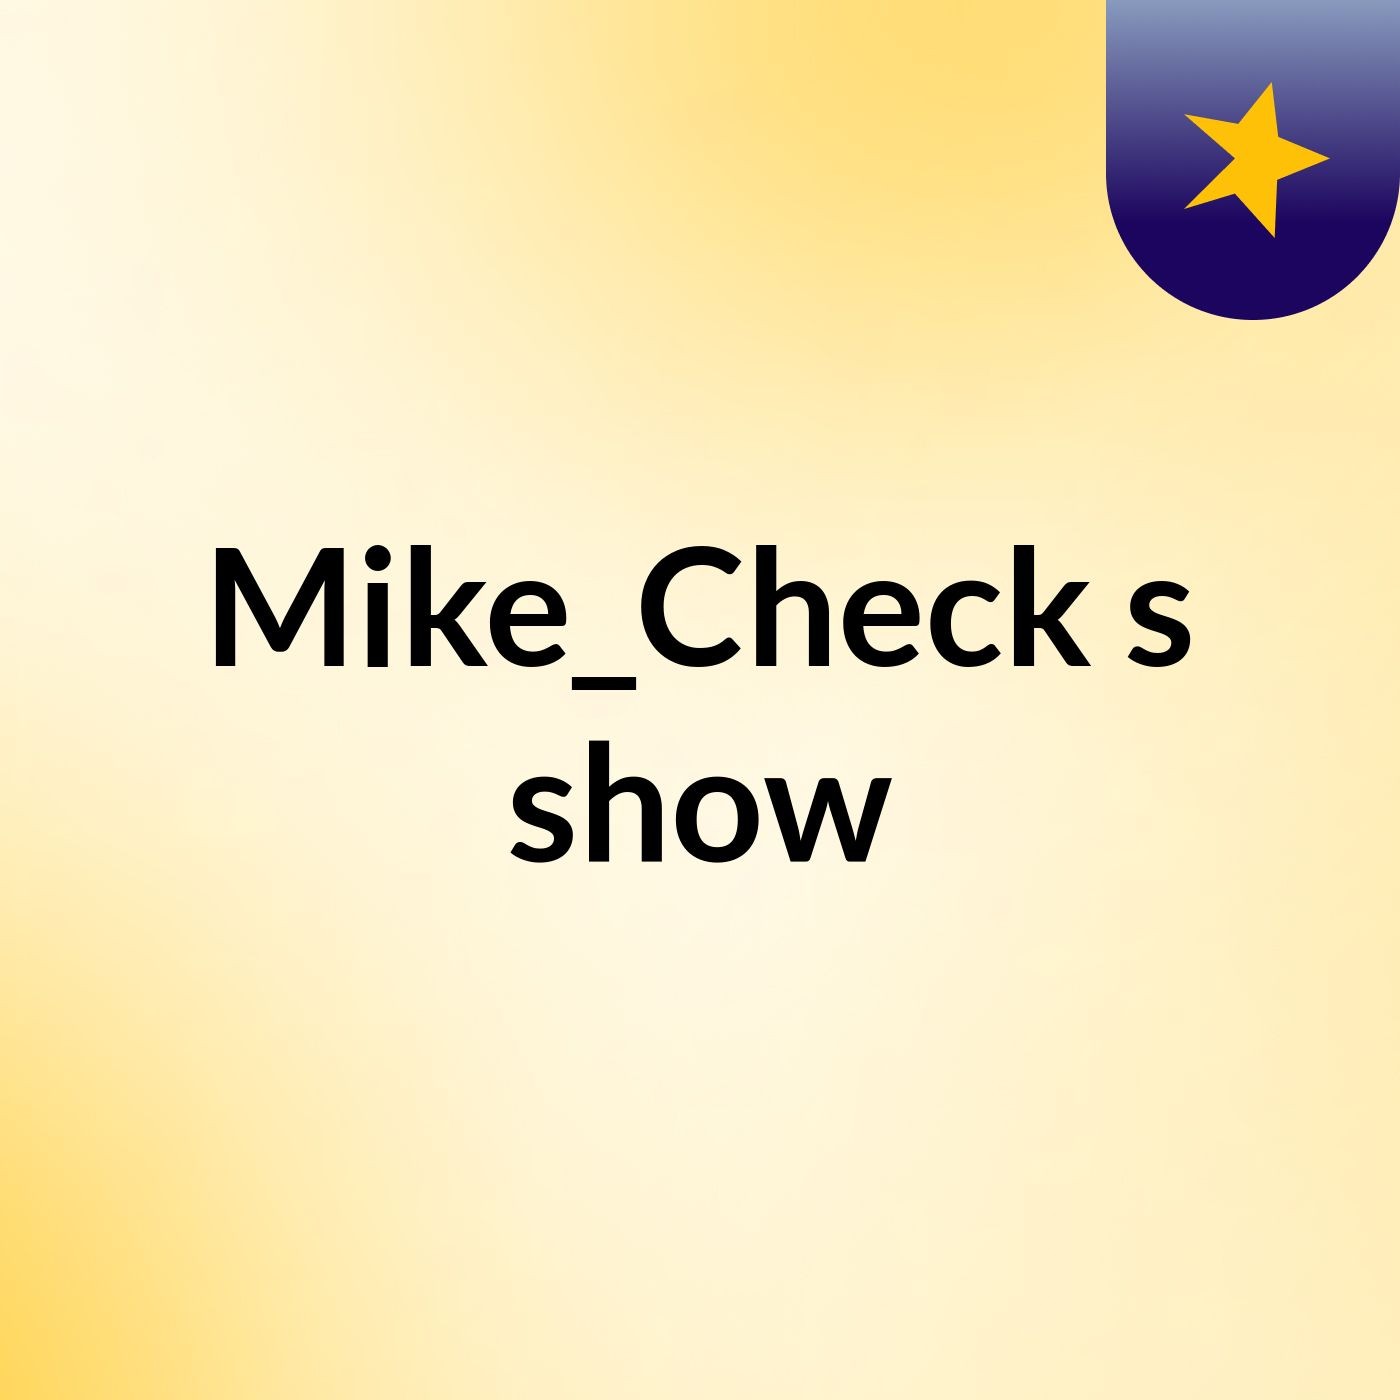 Mike_Check's show